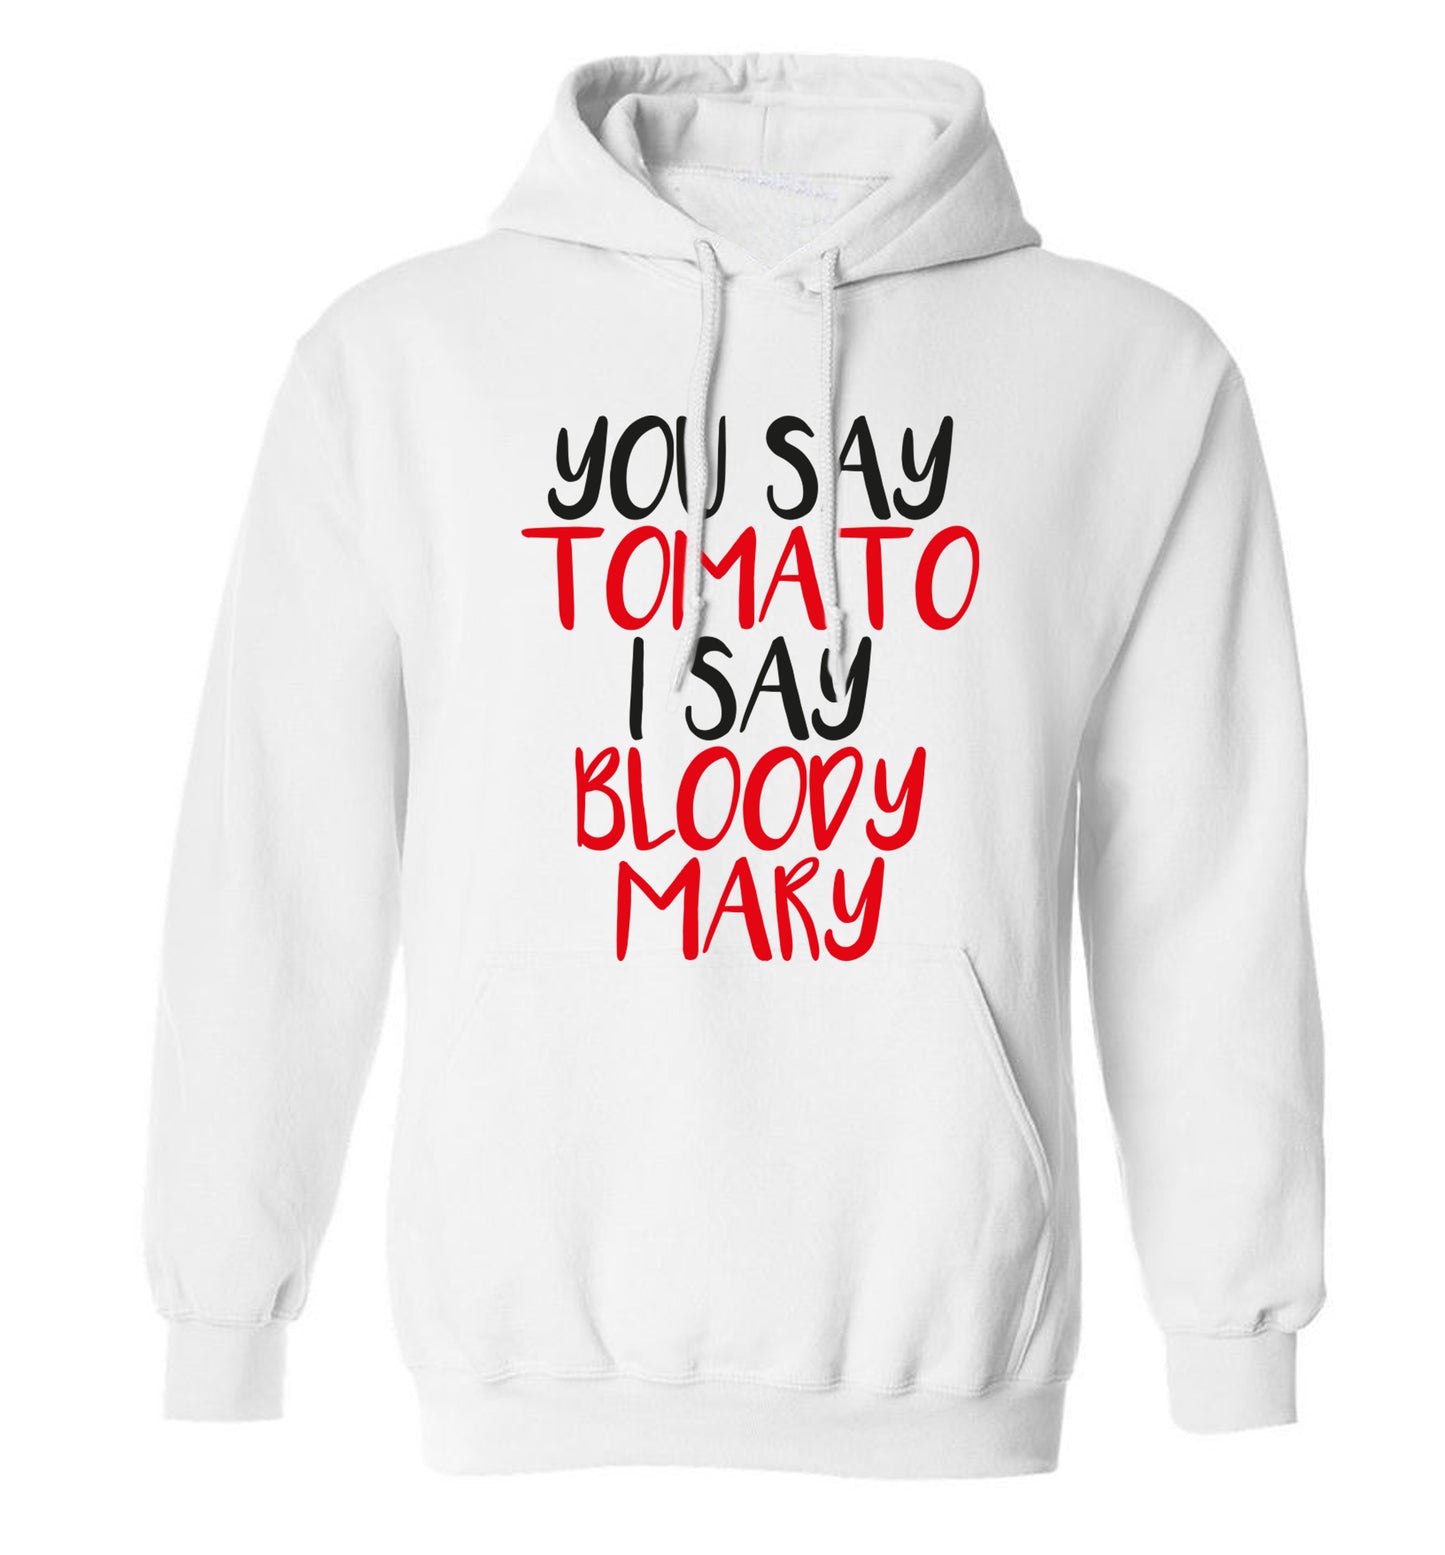 You say tomato I say bloody mary adults unisex white hoodie 2XL